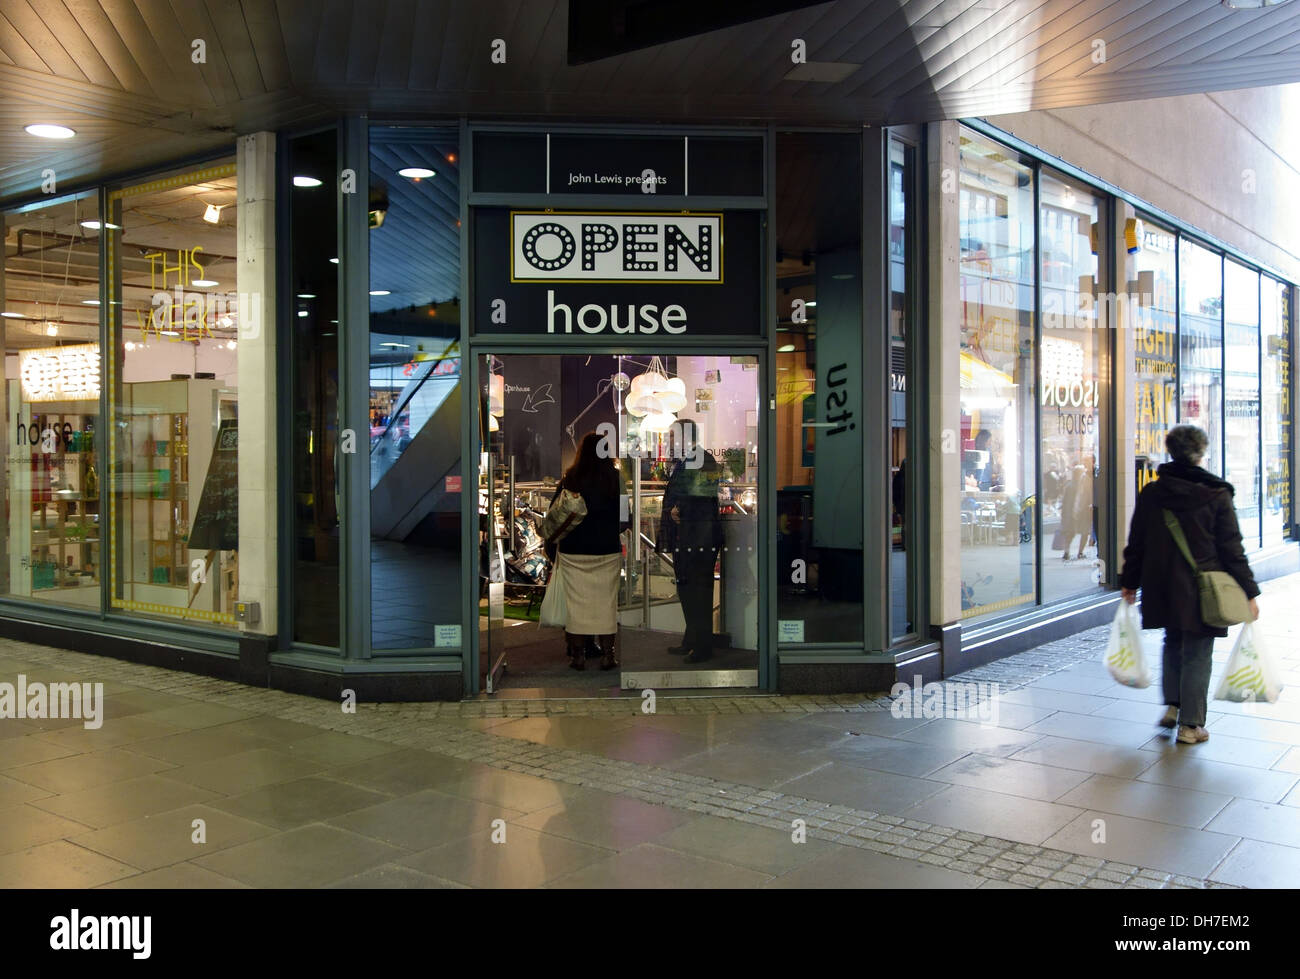 John Lewis Open House pop-up store in Centre, London Stock Alamy